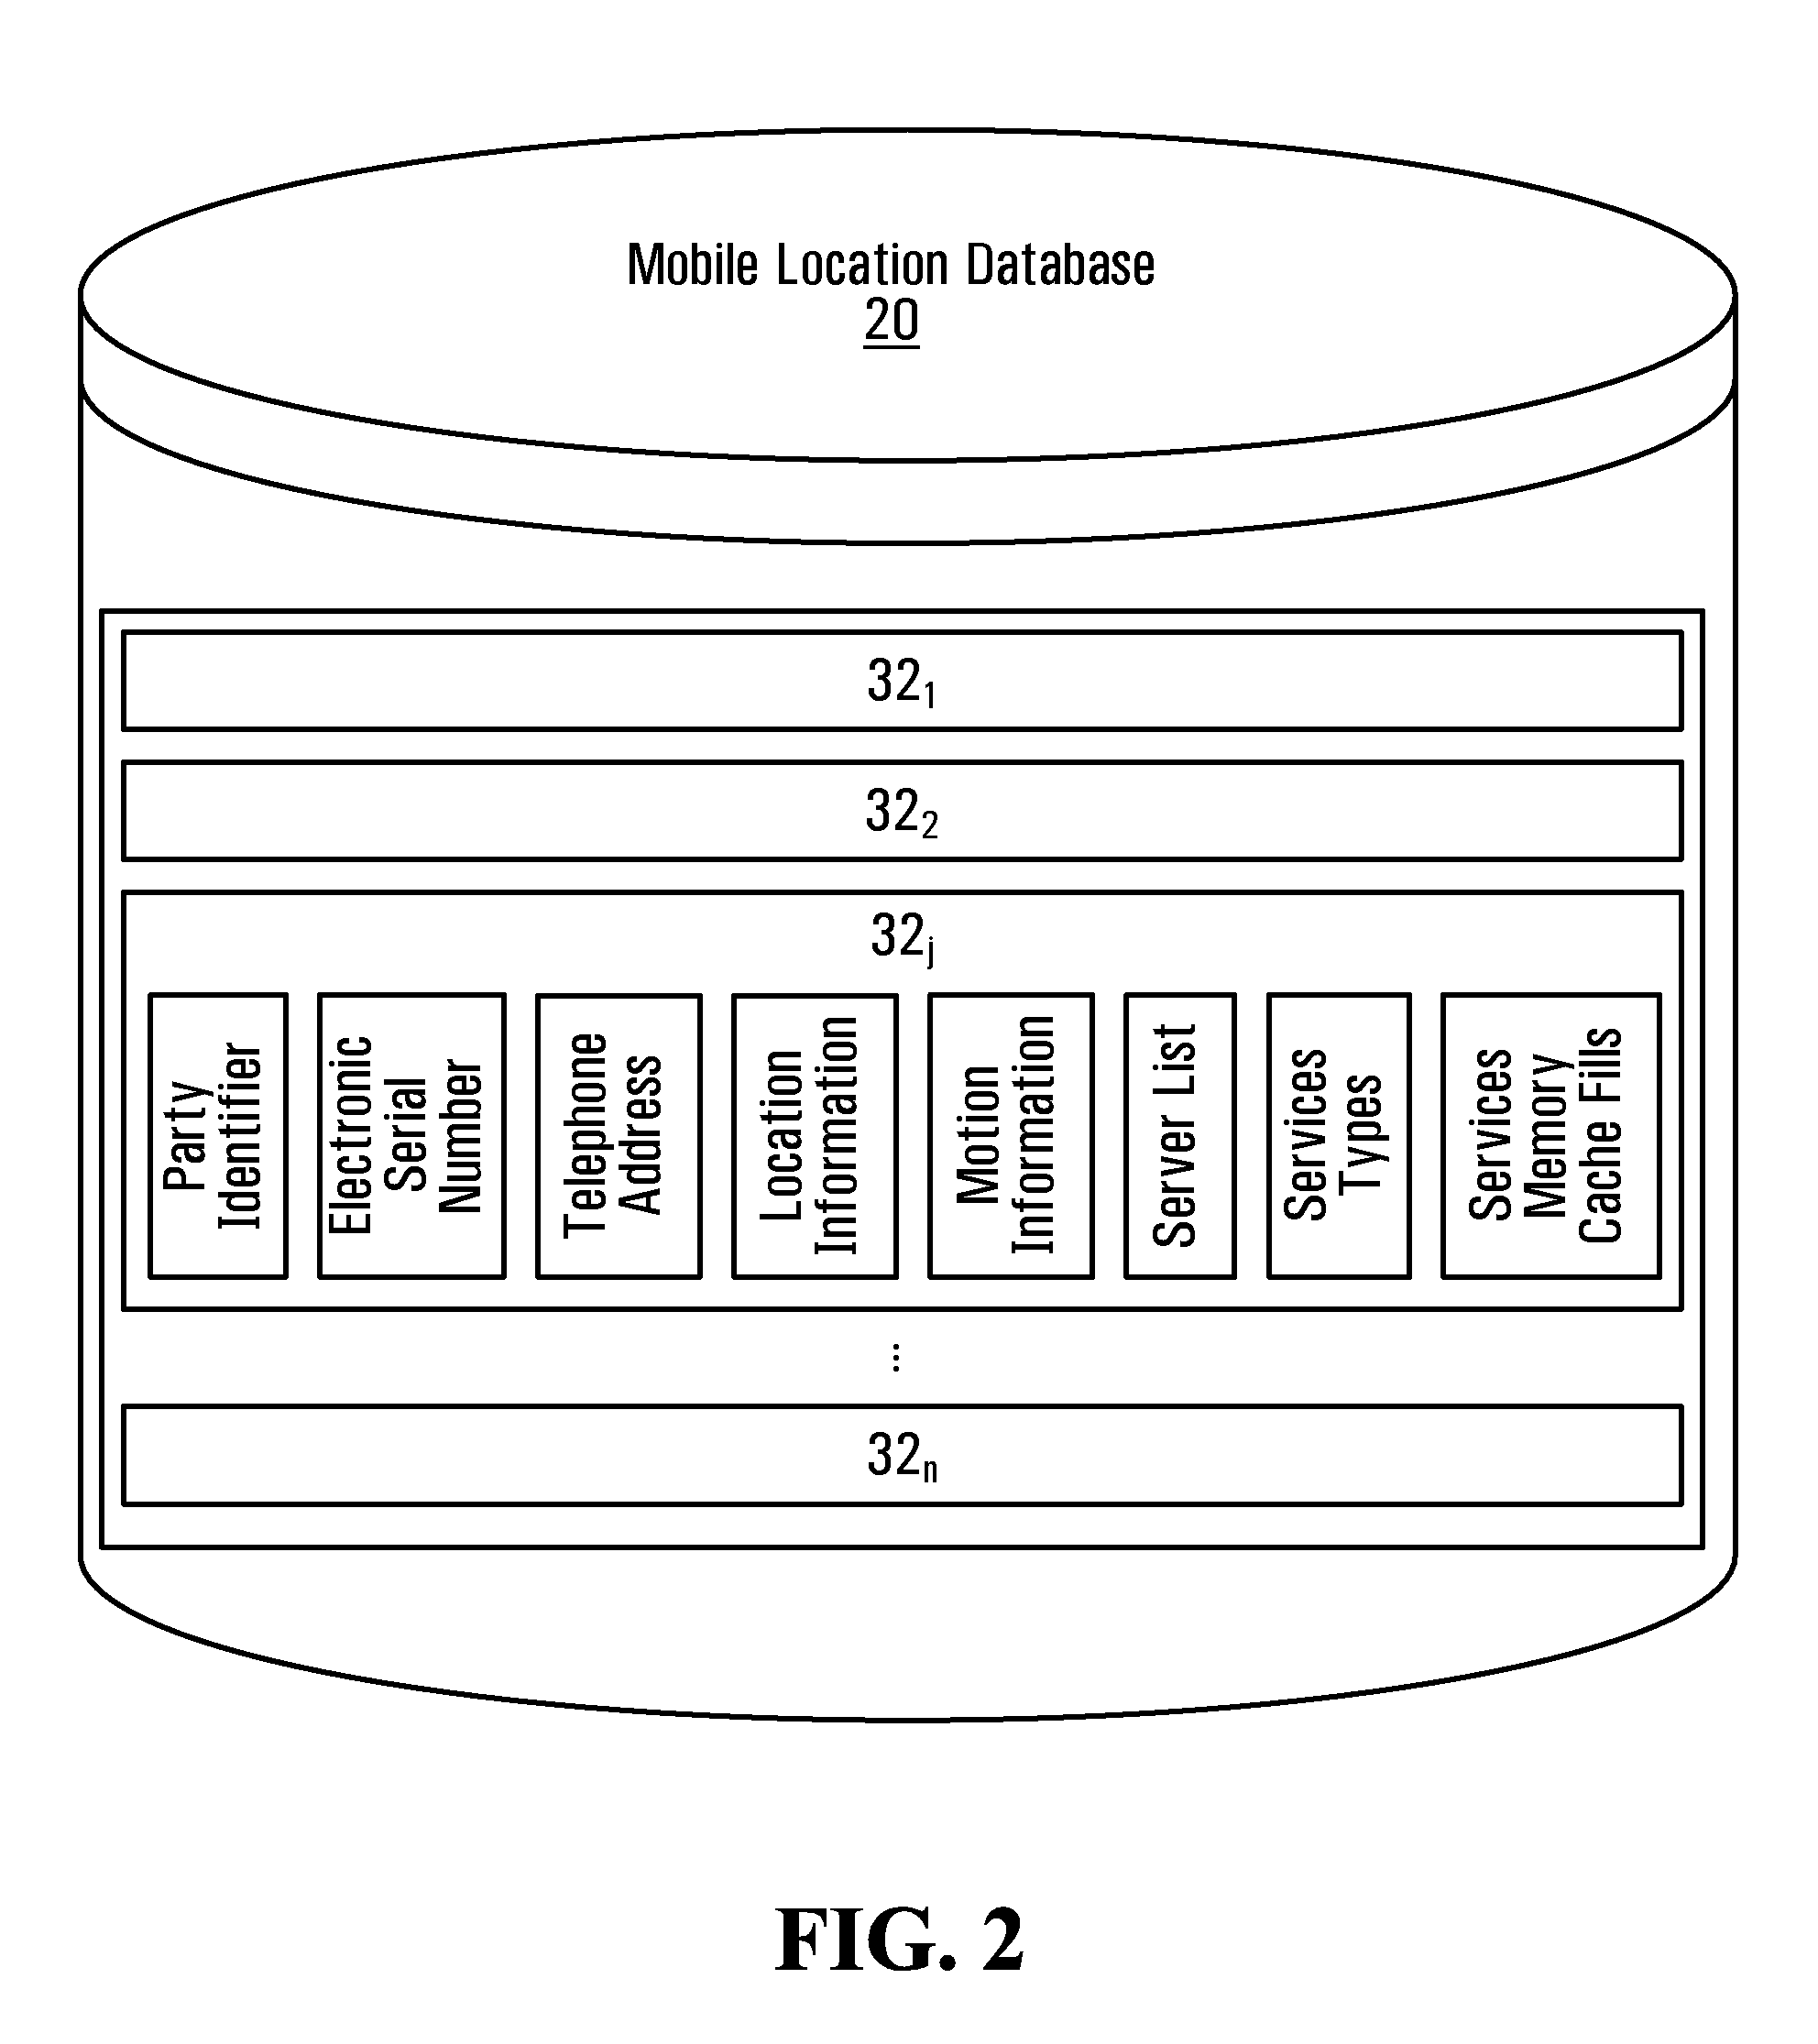 Method and system for reducing service interruptions to mobile communication devices